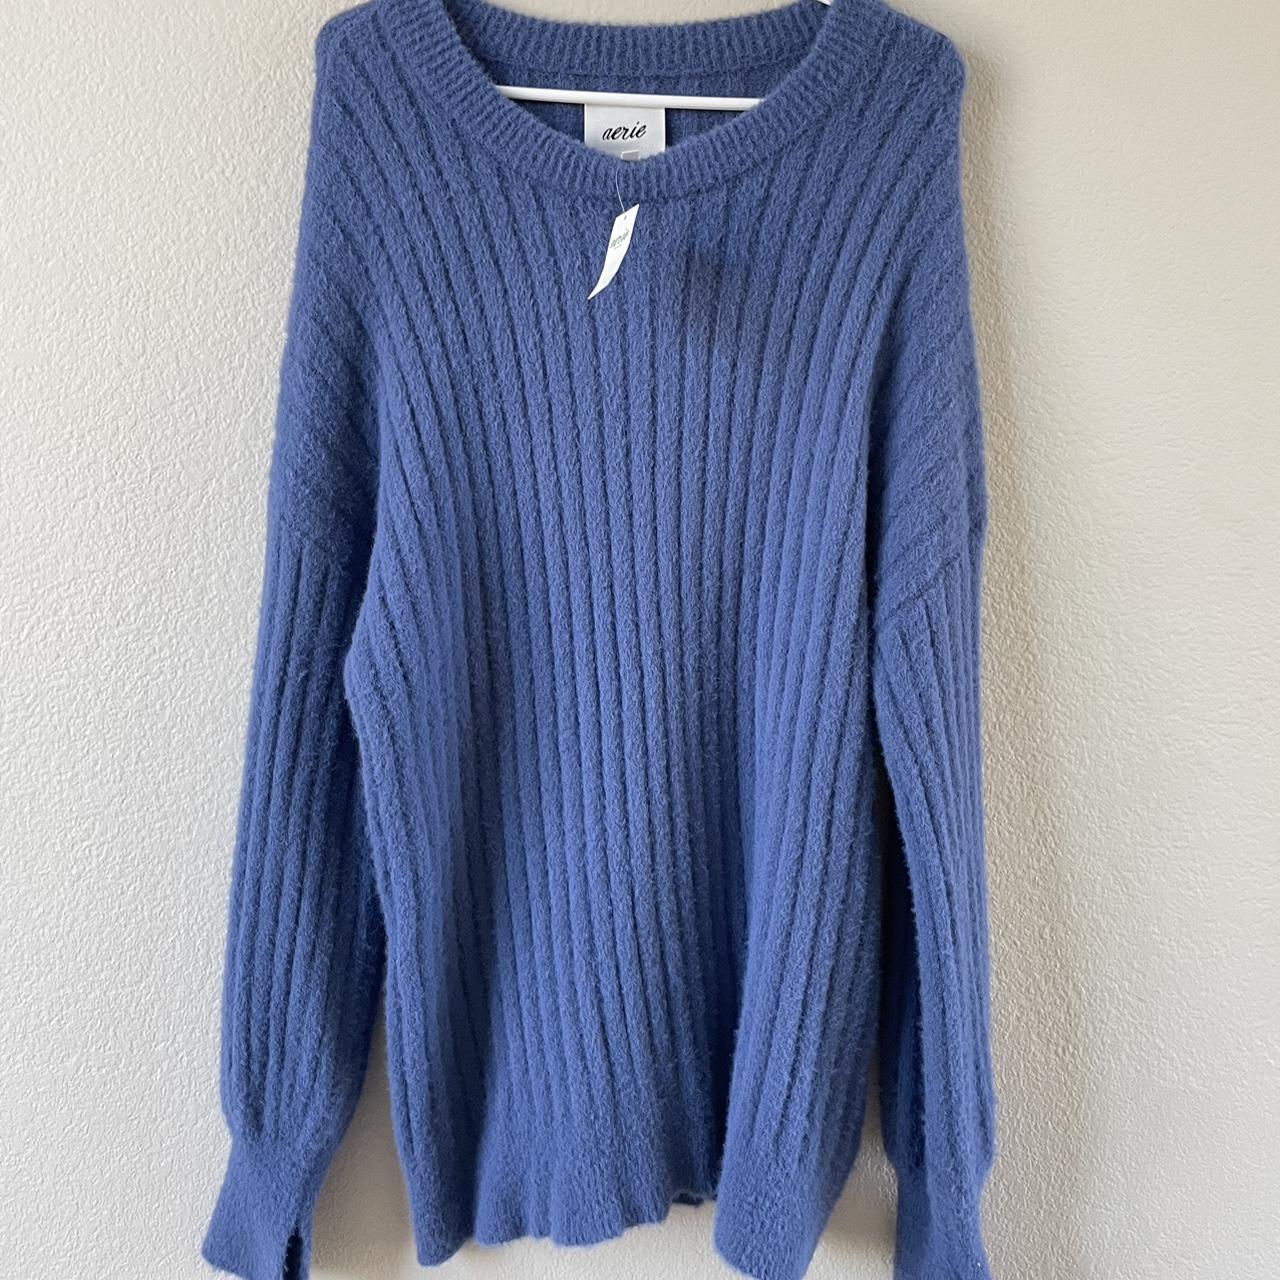 Women’s Aerie Blue Knit Sweater Size Small